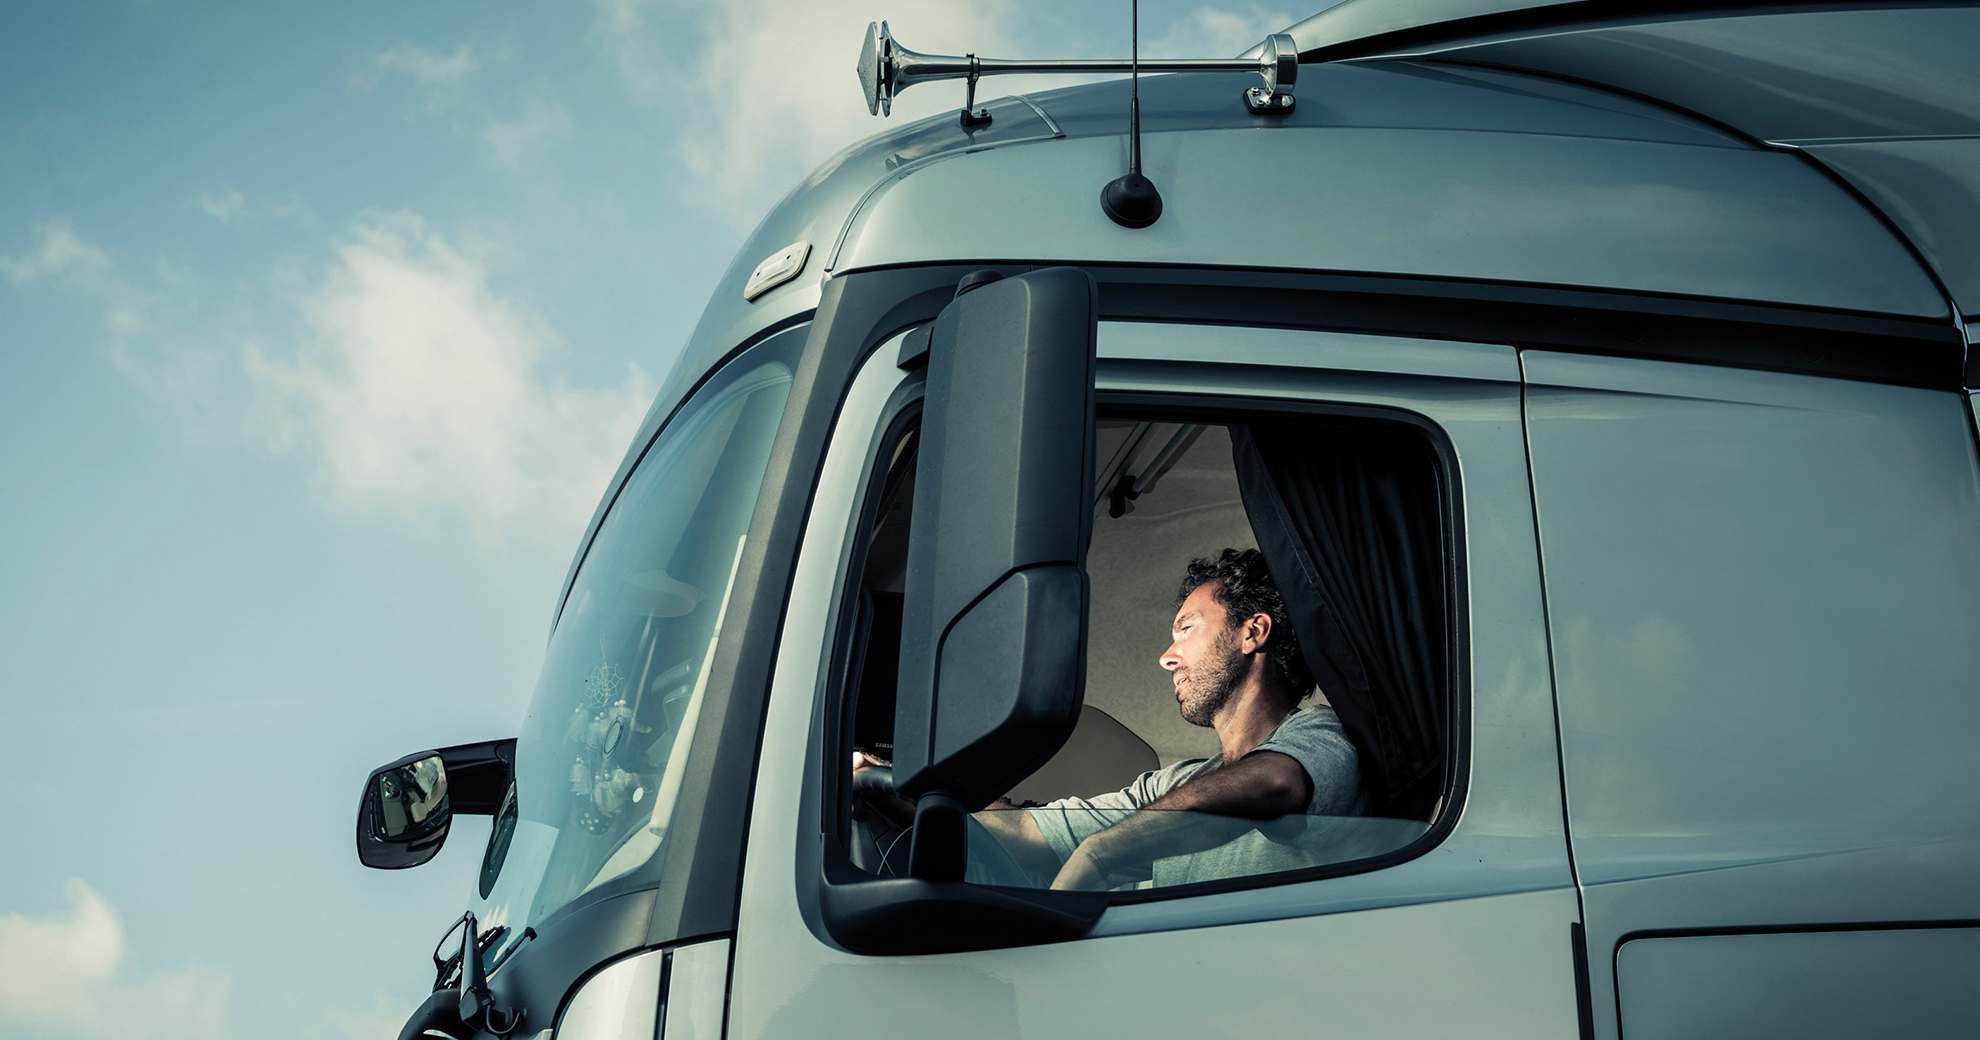 Portrait of a truck driver sitting in cab